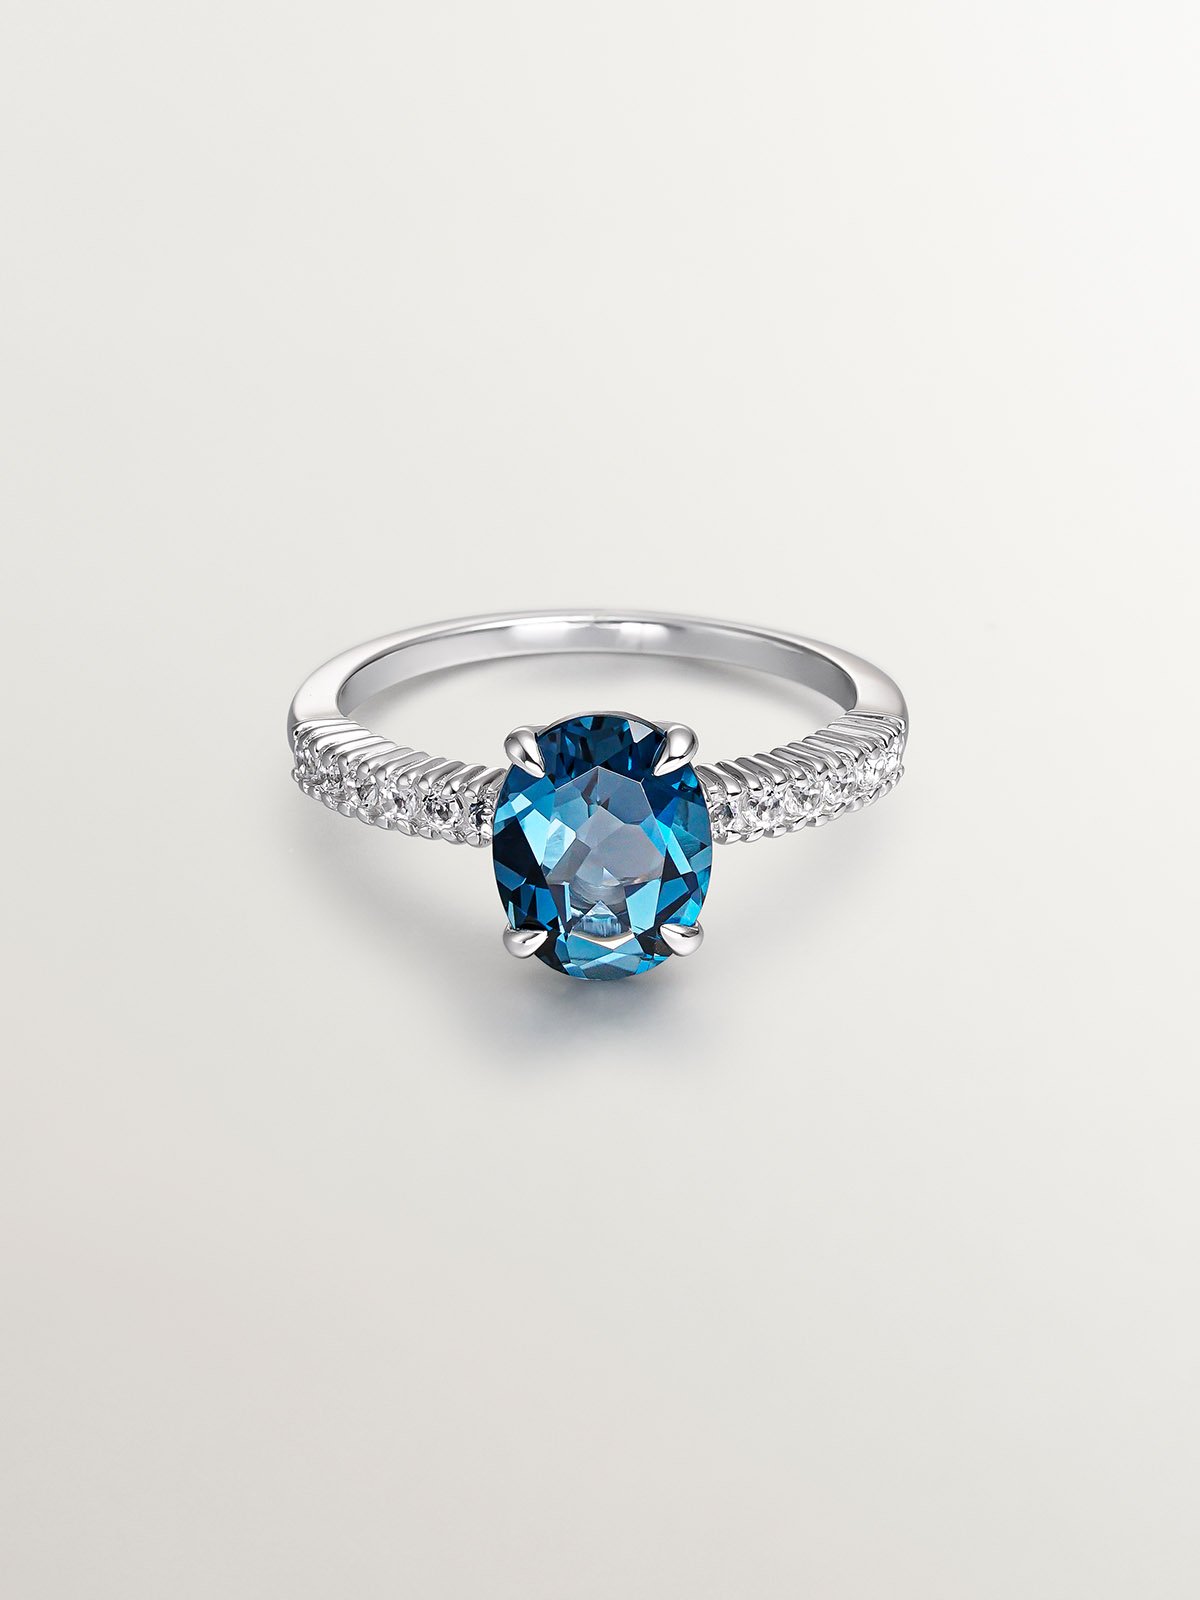 925 Sterling Silver Ring with Blue and White Topaz